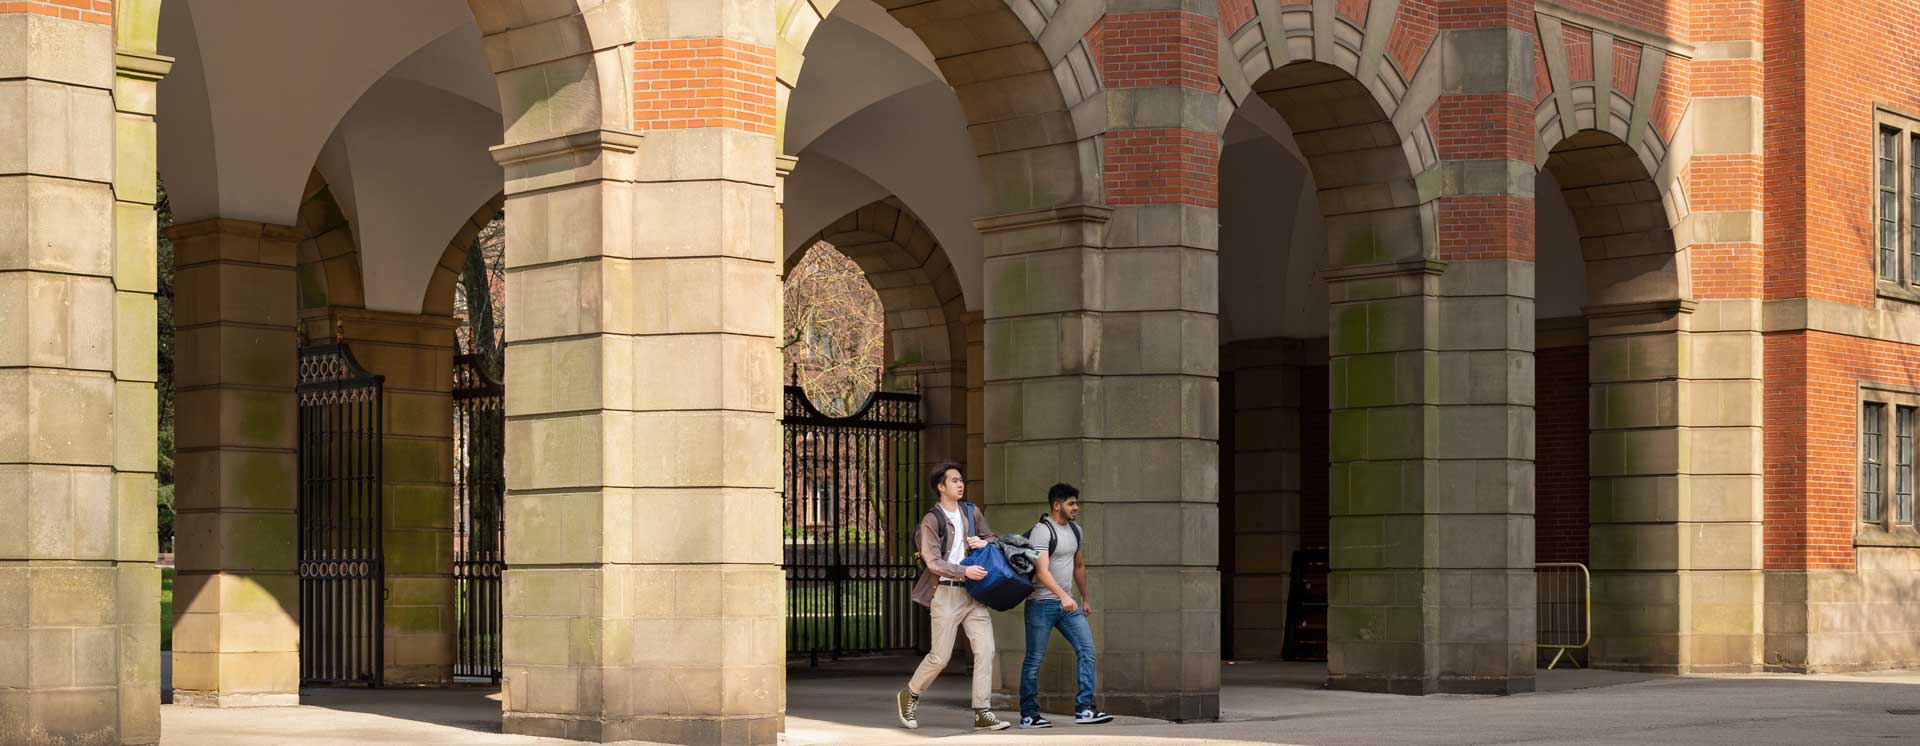 student walking under the Law School arches at the University of Birmingham on a sunny day